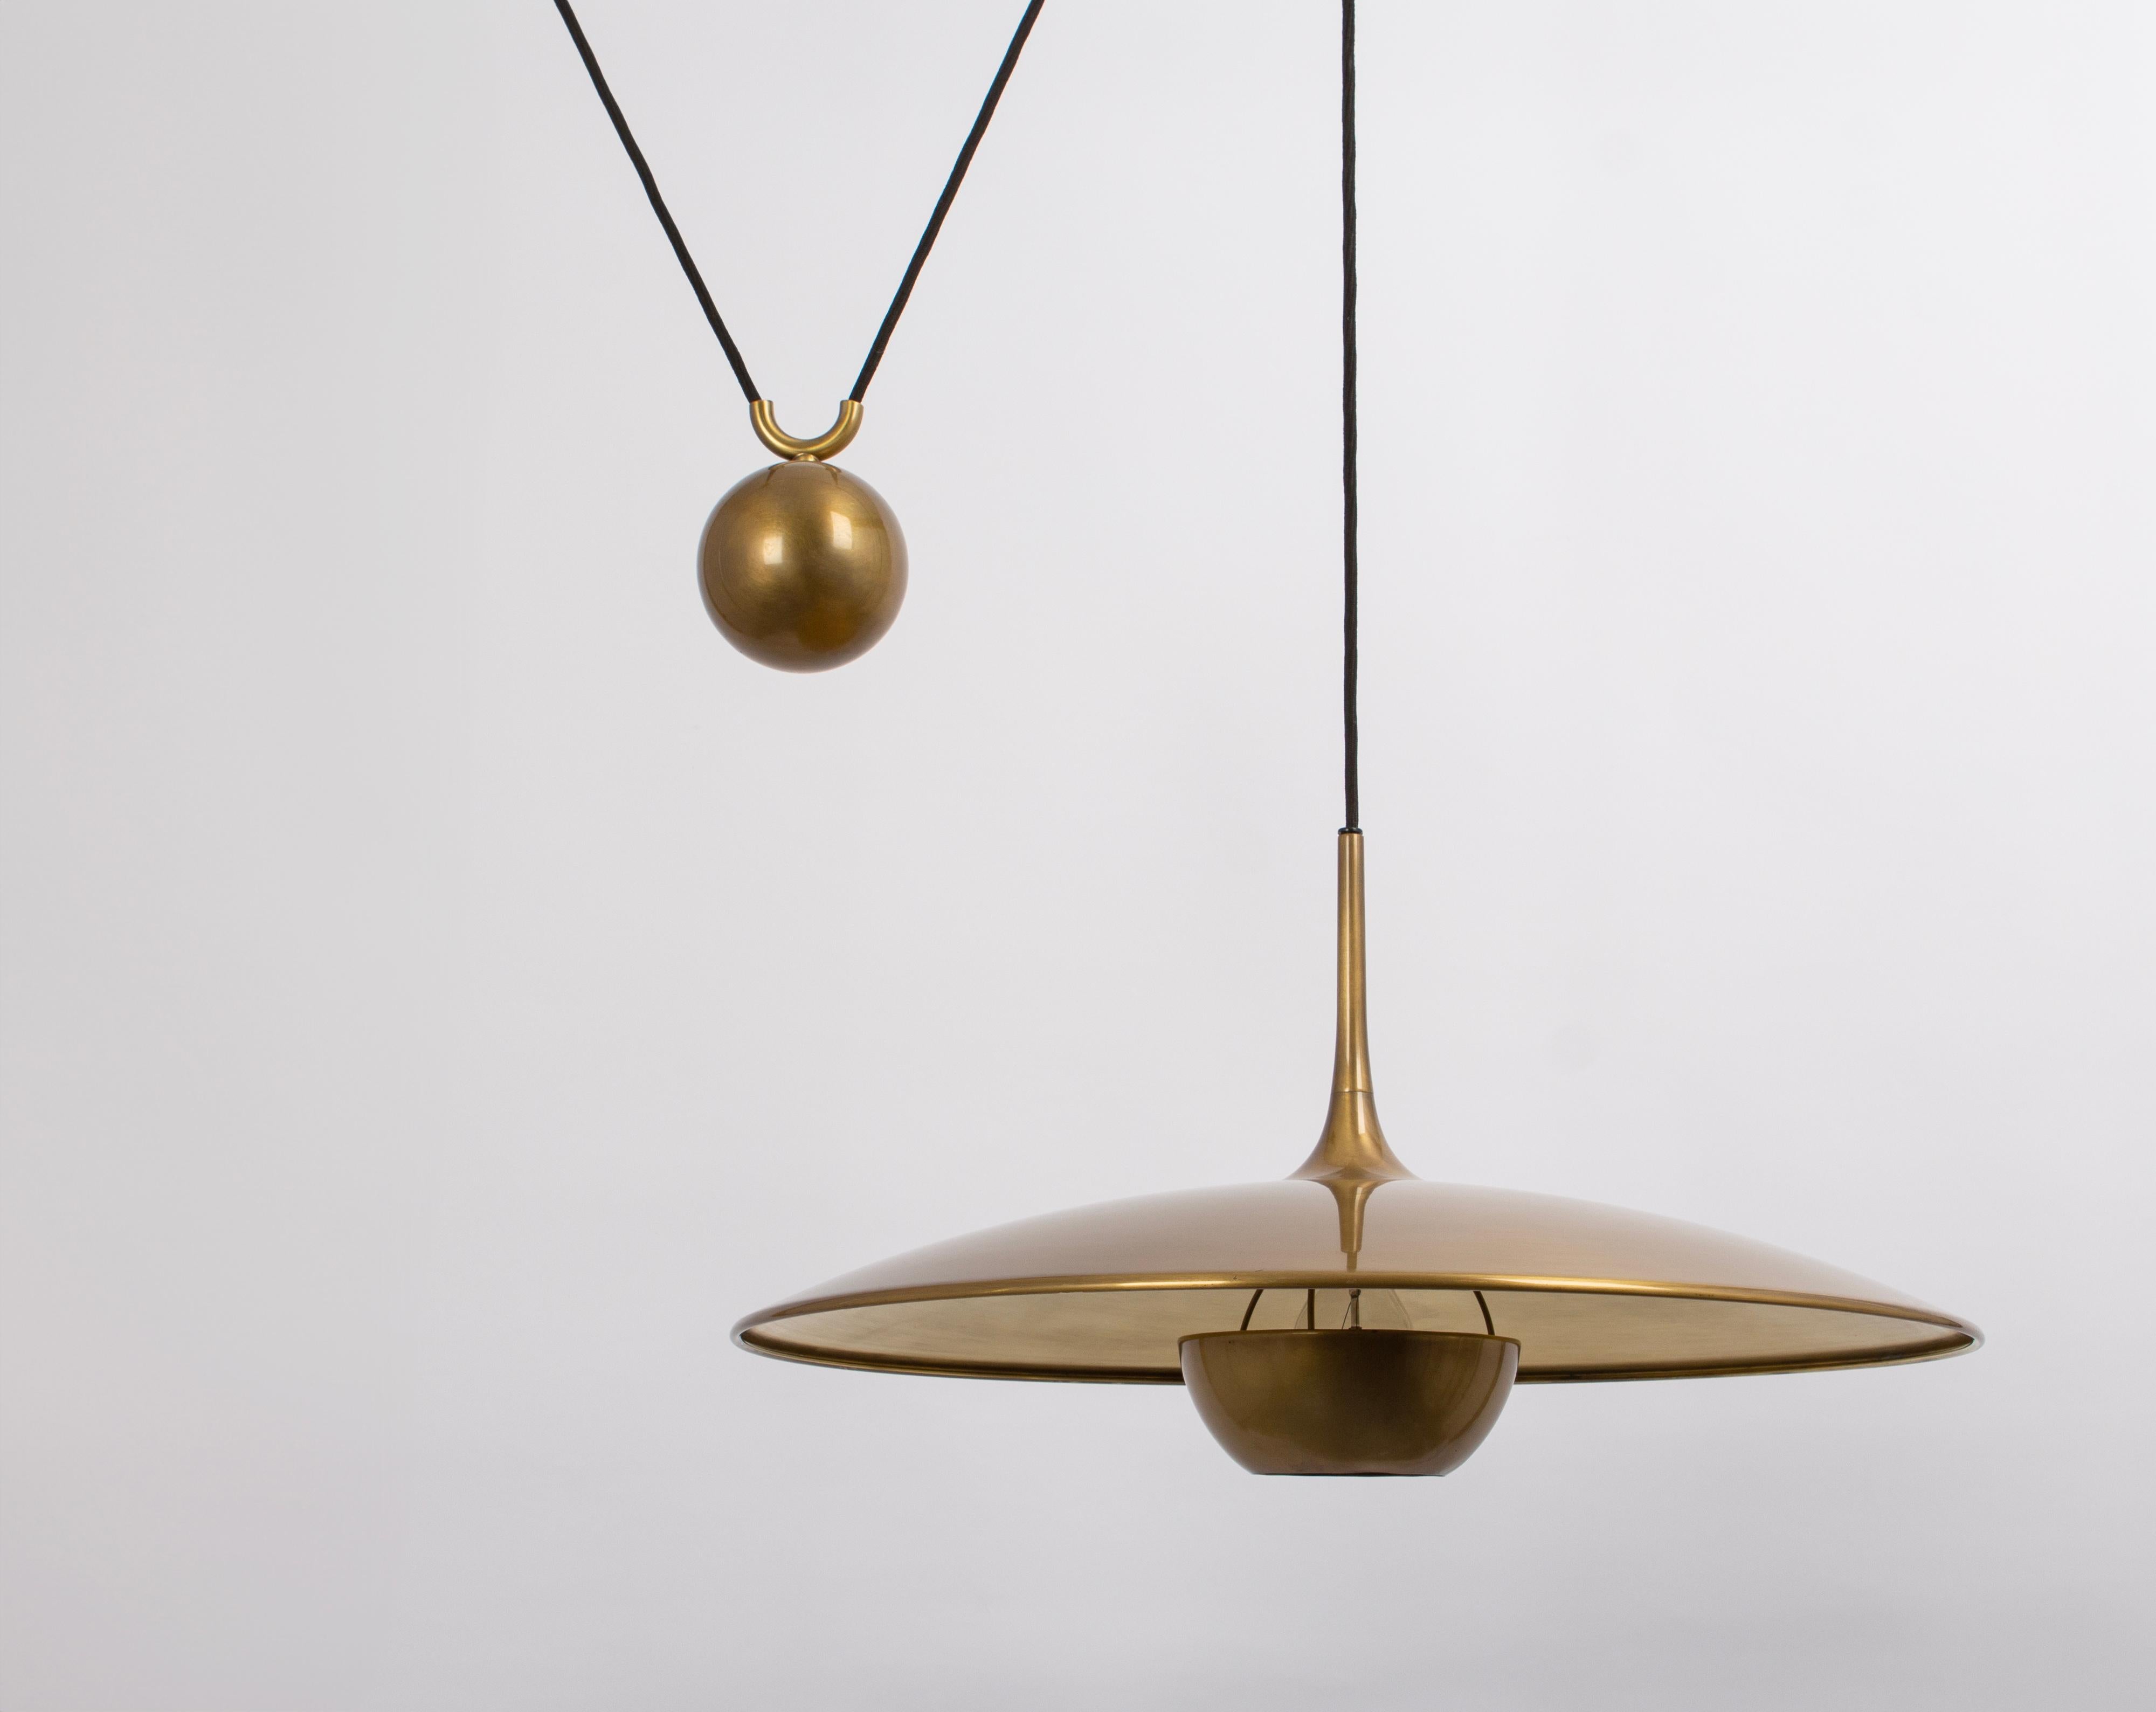 Stunning Onos dark brass pendant with adjustable counterweight designed by Florian Schulz, Germany, 1970s

It is a masterpiece of design and craftsmanship. It seamlessly blends functionality and aesthetics to create a lighting fixture that's as much